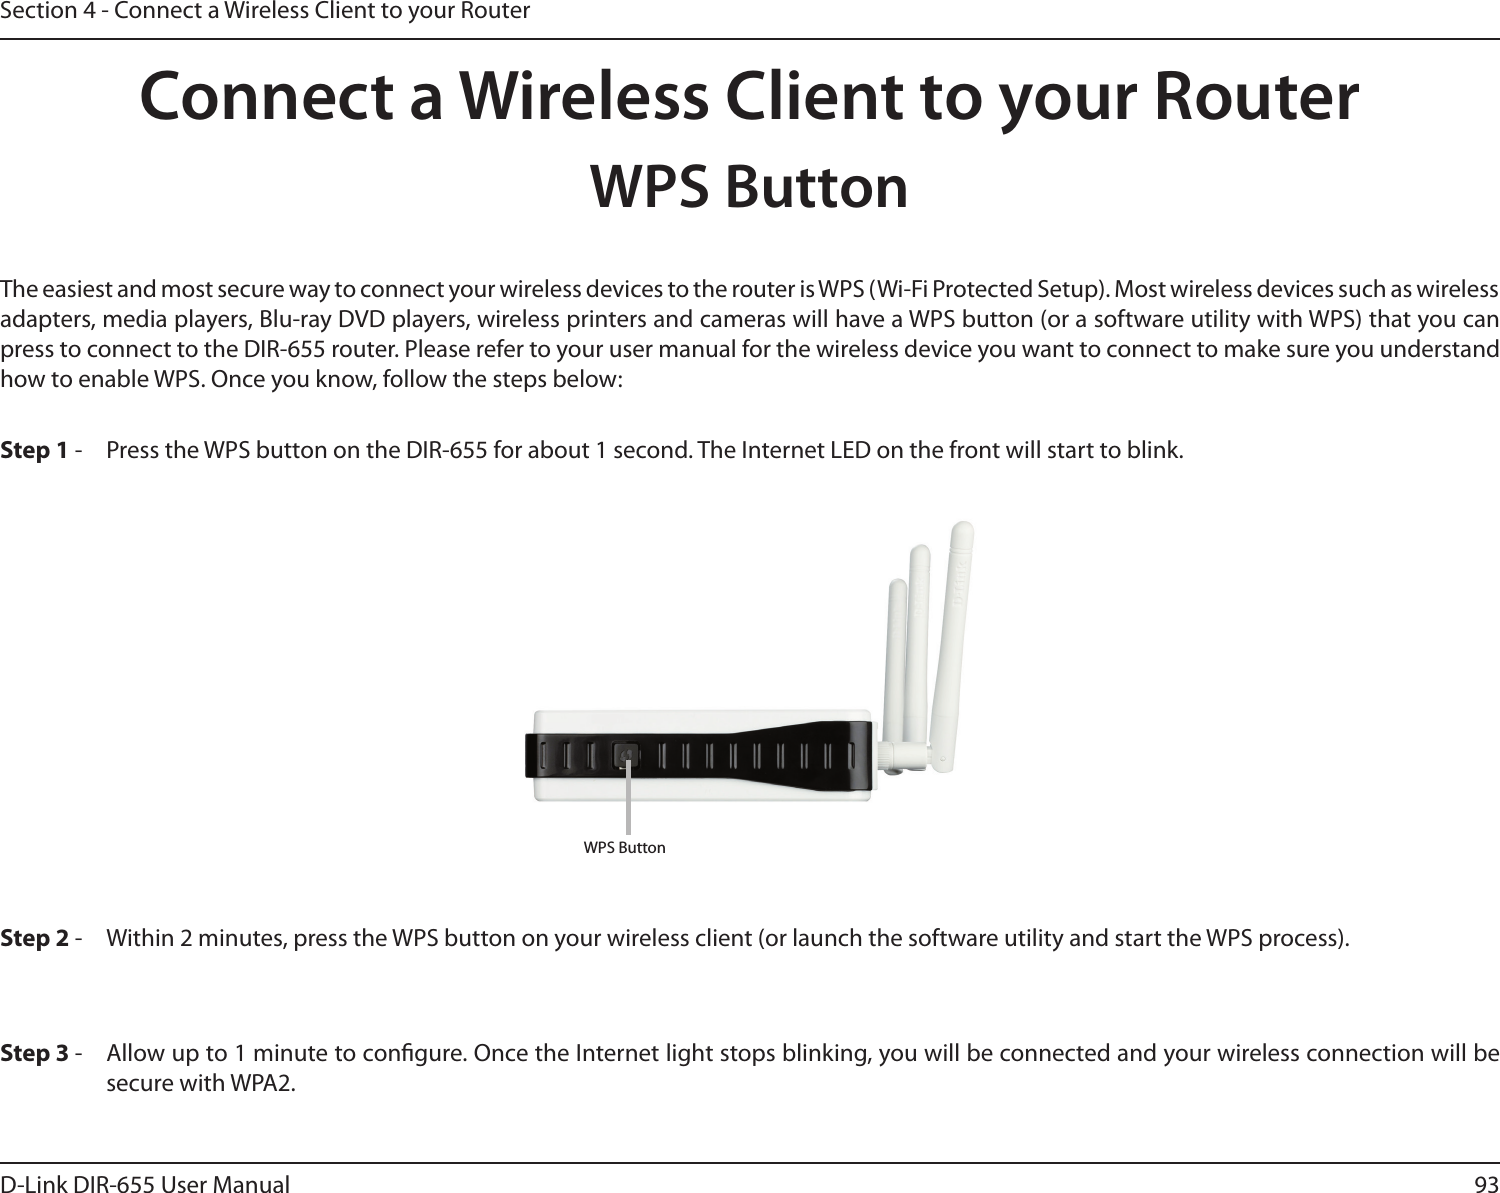 93D-Link DIR-655 User ManualSection 4 - Connect a Wireless Client to your RouterConnect a Wireless Client to your RouterWPS ButtonStep 2 -  Within 2 minutes, press the WPS button on your wireless client (or launch the software utility and start the WPS process).The easiest and most secure way to connect your wireless devices to the router is WPS (Wi-Fi Protected Setup). Most wireless devices such as wireless adapters, media players, Blu-ray DVD players, wireless printers and cameras will have a WPS button (or a software utility with WPS) that you can press to connect to the DIR-655 router. Please refer to your user manual for the wireless device you want to connect to make sure you understand how to enable WPS. Once you know, follow the steps below:Step 1 -  Press the WPS button on the DIR-655 for about 1 second. The Internet LED on the front will start to blink.Step 3 -  Allow up to 1 minute to congure. Once the Internet light stops blinking, you will be connected and your wireless connection will be secure with WPA2.WPS Button